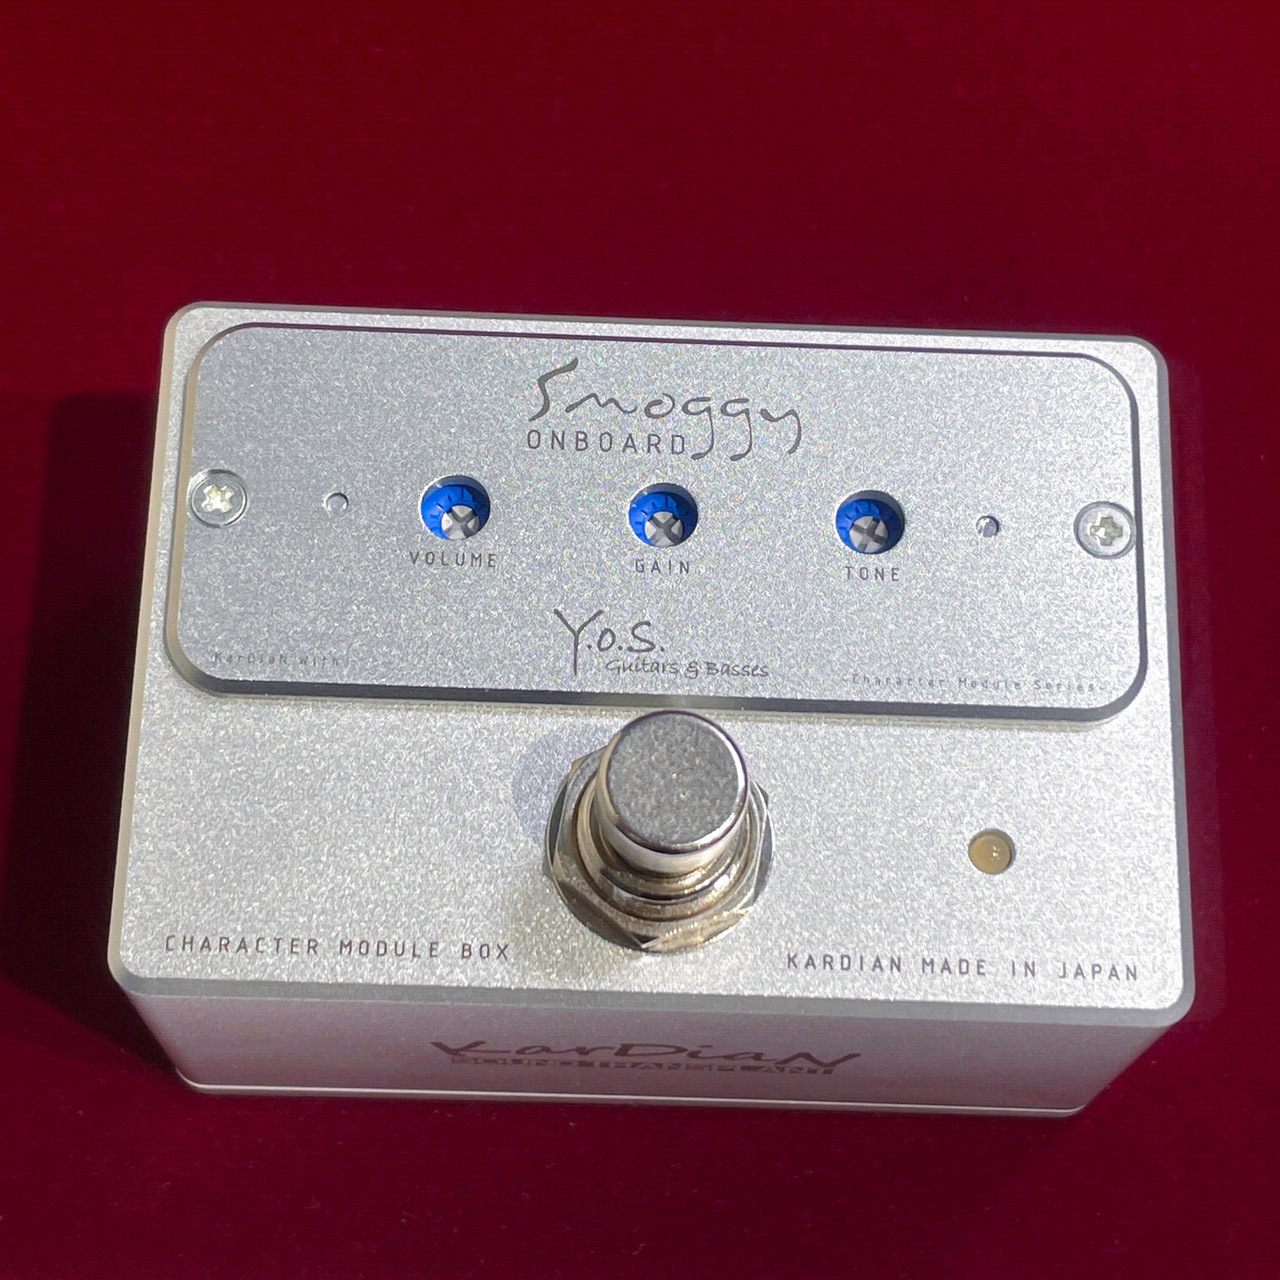 Y.O.S.ギター工房 Smoggy Onboard & Character Module Box 【セット ...